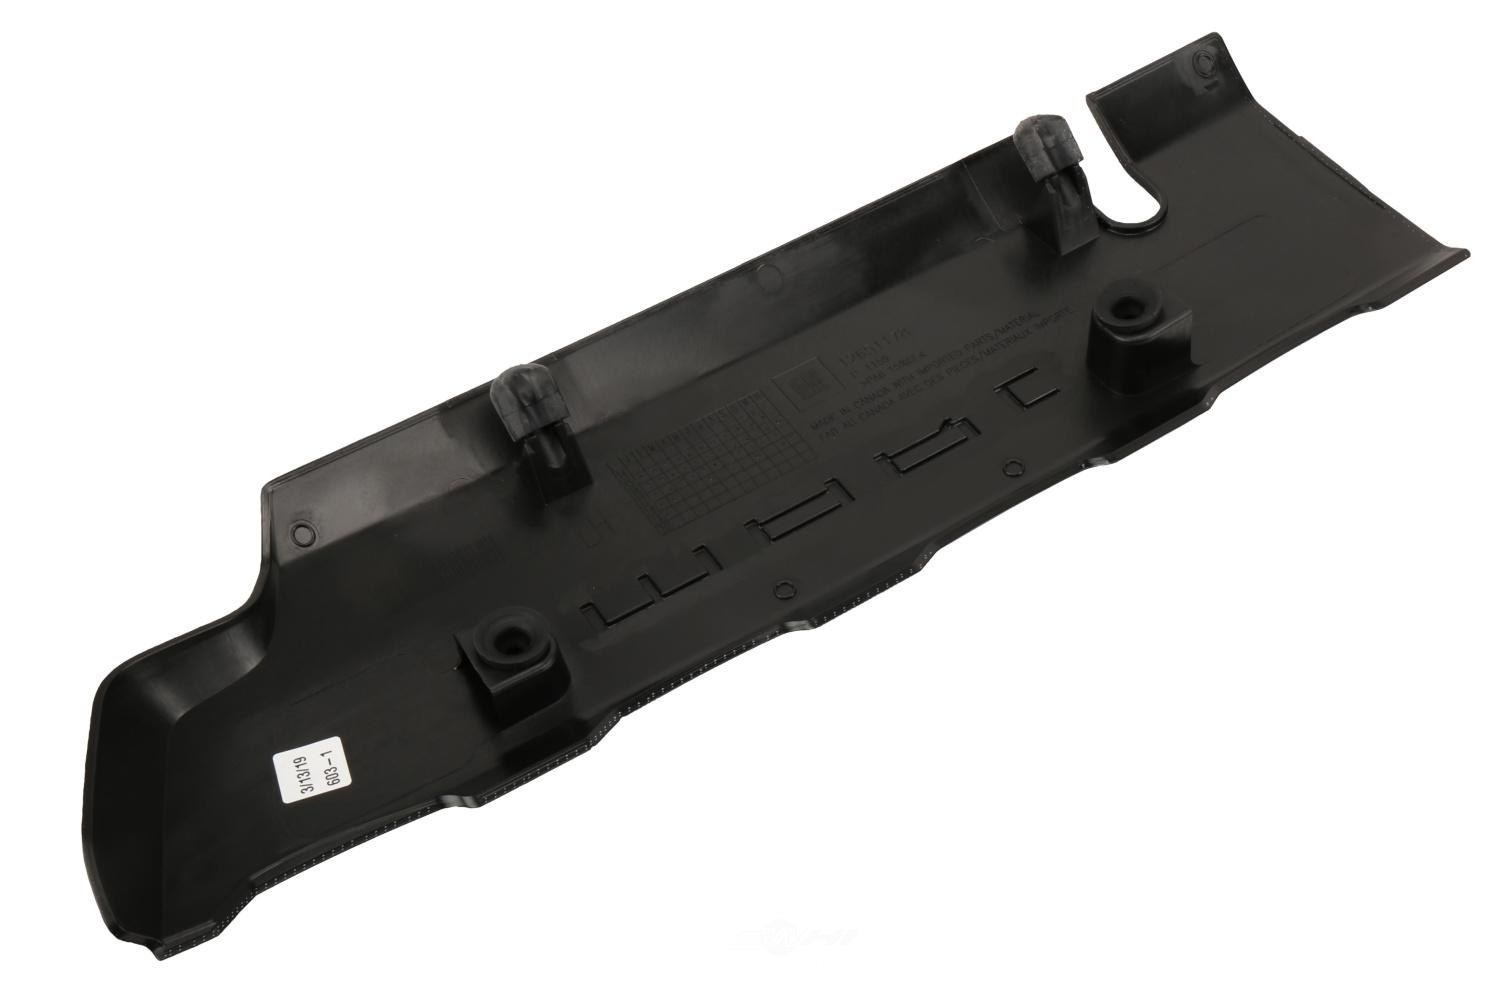 GM GENUINE PARTS CANADA - Fuel Injector Rail Cover - GMC 12651178